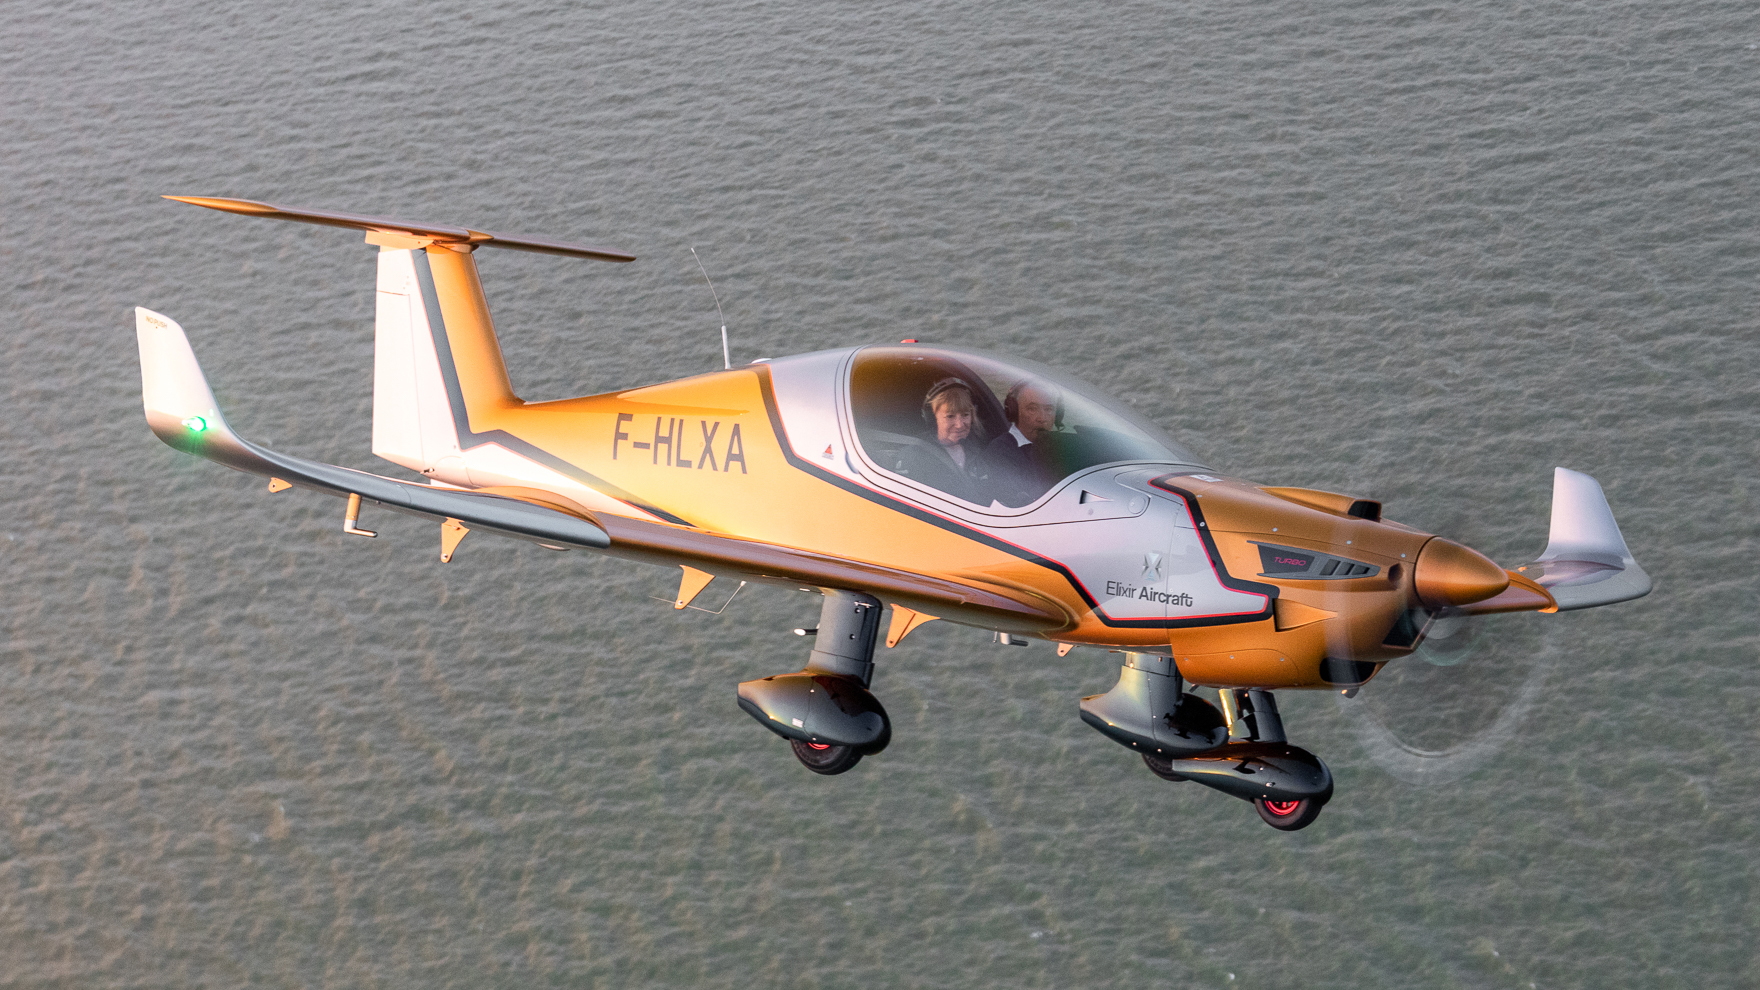 The Elixir, a two-seat trainer and recreational airplane, will make its U.S. debut at EAA AirVenture. Photo courtesy of Elixir Aircraft.